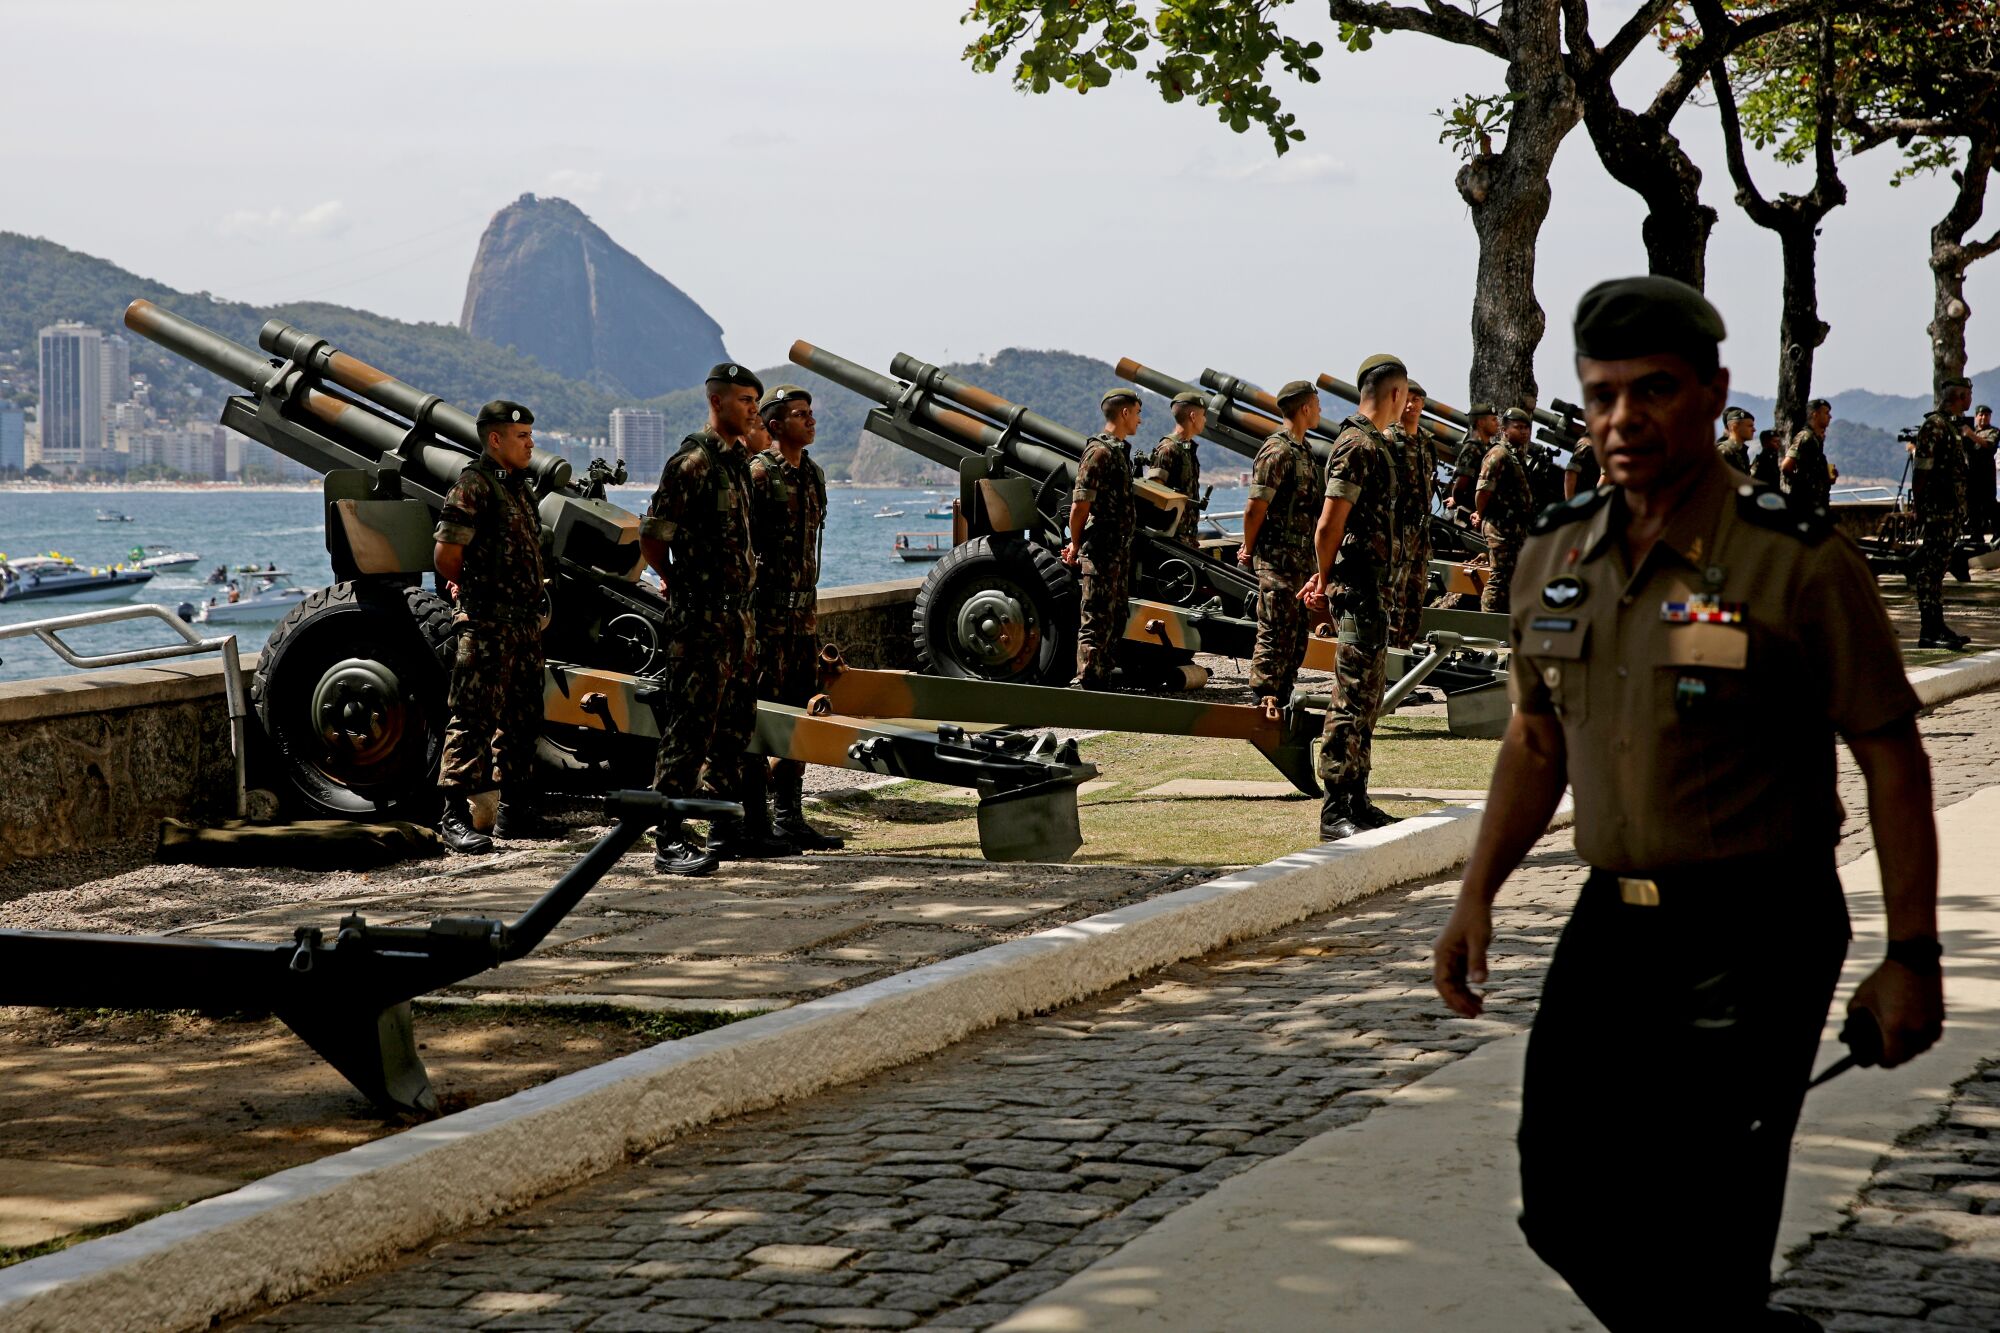 A man in a beret and military uniform passes other people in fatigues standing near cannons with the ocean as a backdrop